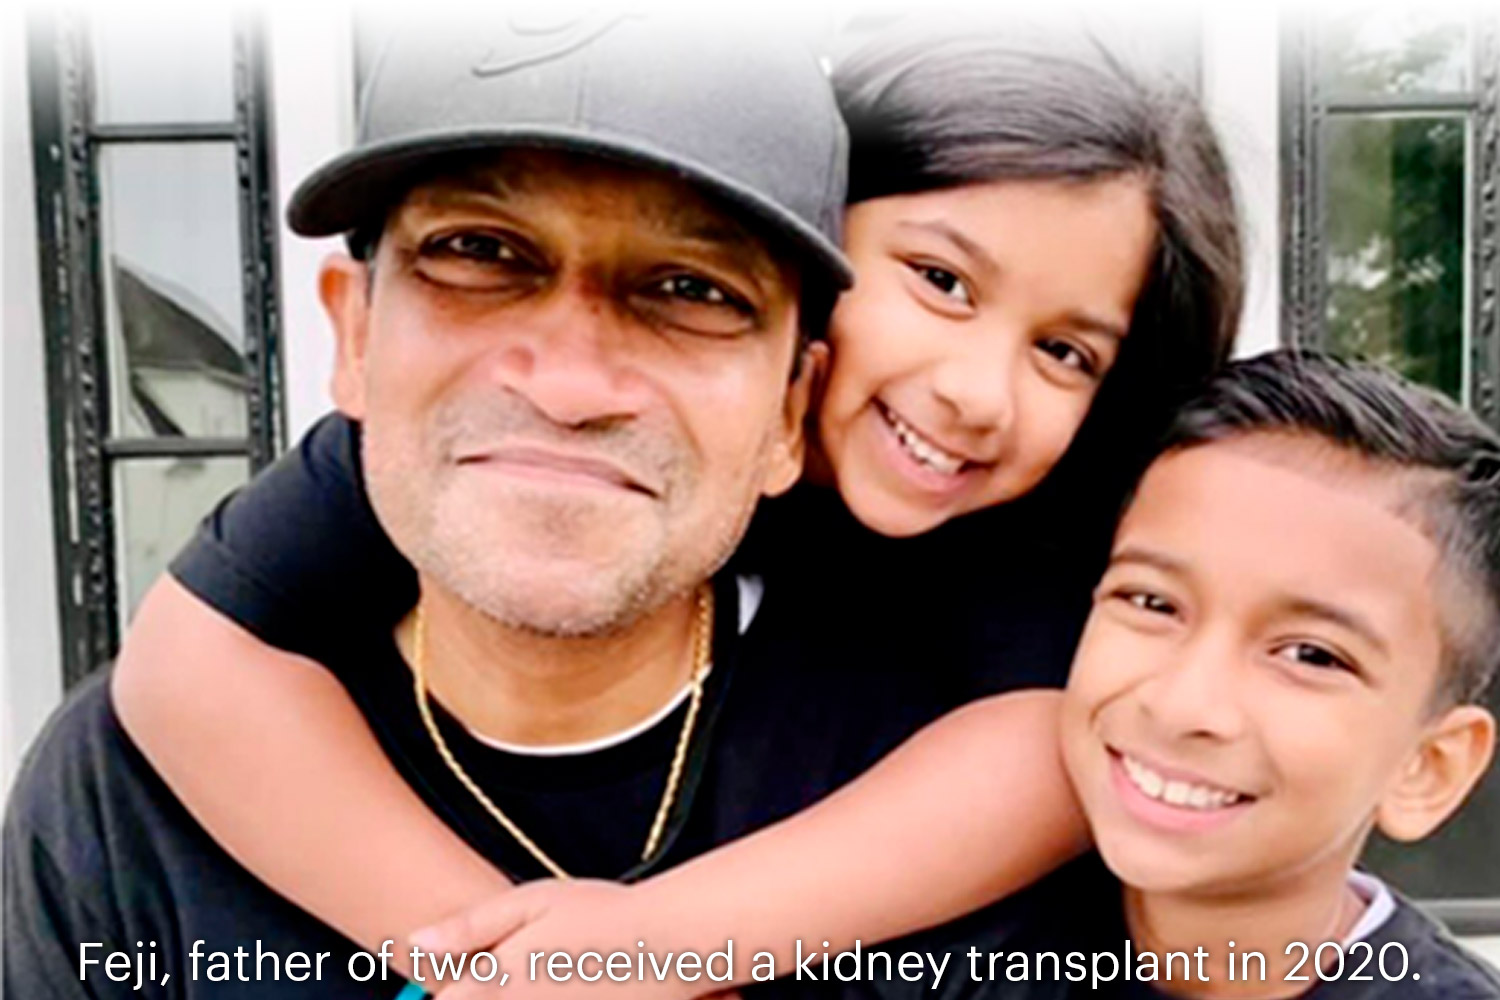 Feji posing with his young children. Feji received a kidney transplant in 2020.